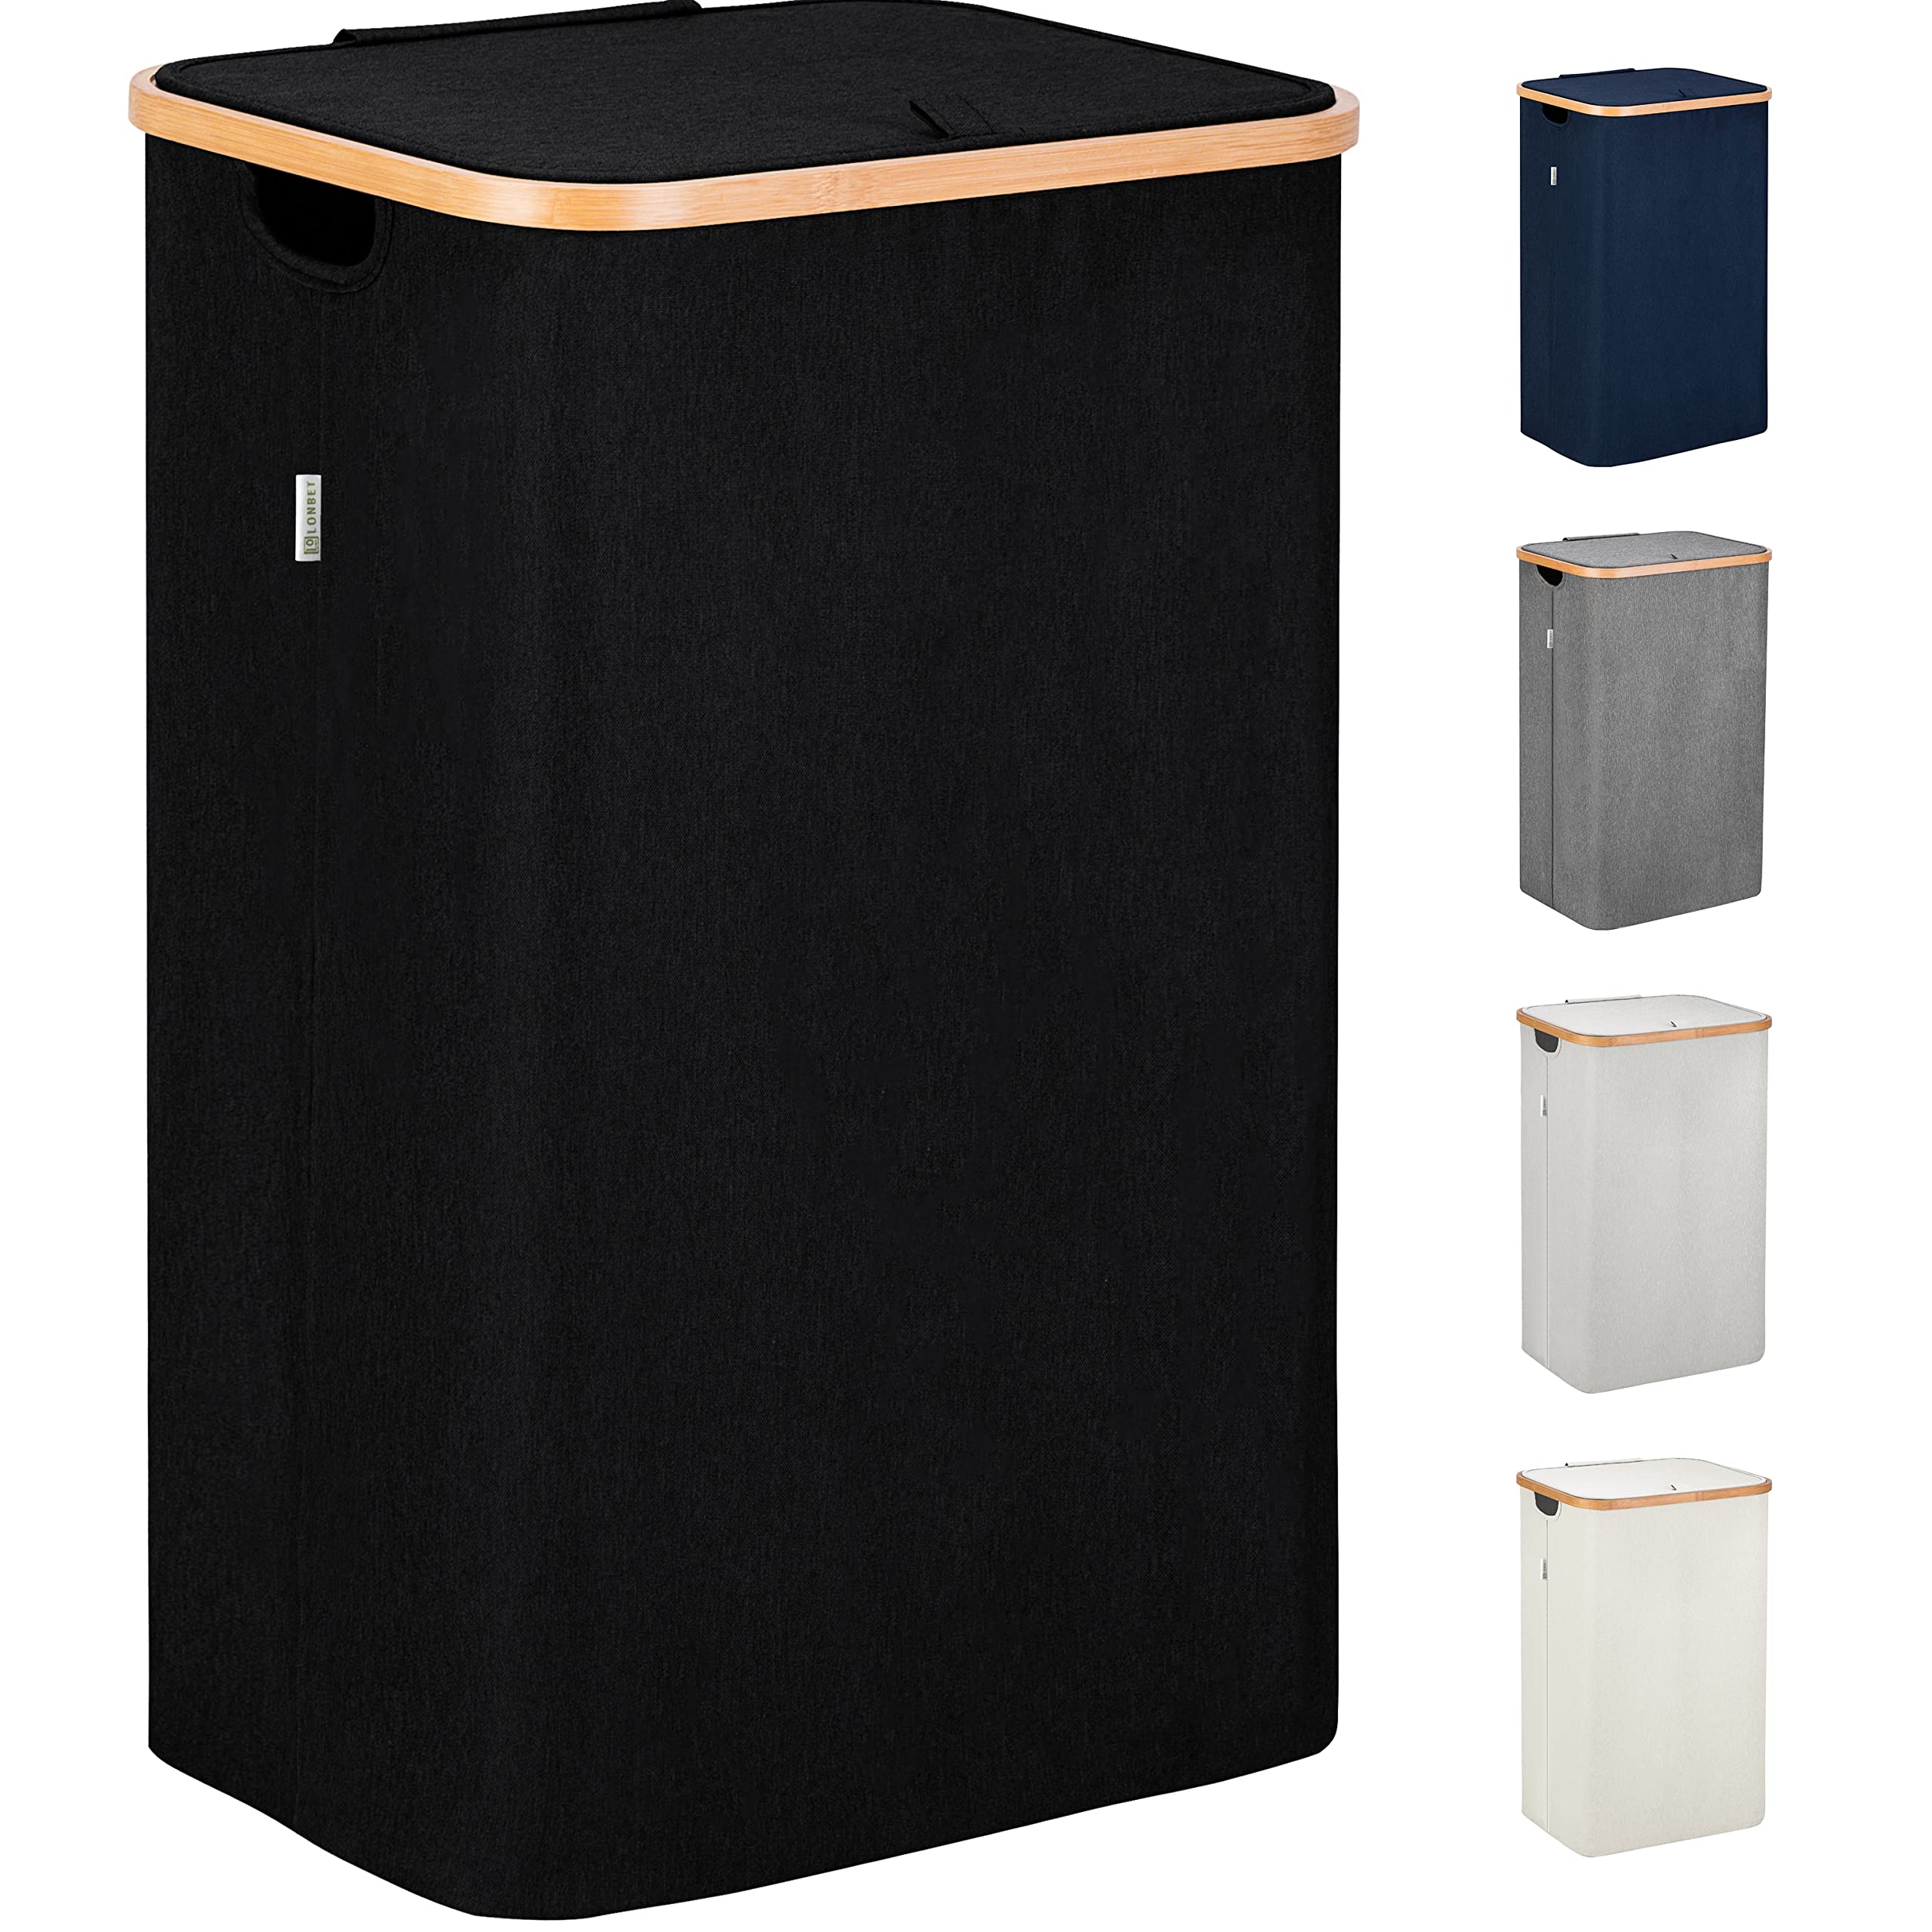 Lonbet - Black Double Laundry Hamper with Lid, 2 Sections and Removable Bags, Hamper for Laundry 2 compartment to Simplify Laund